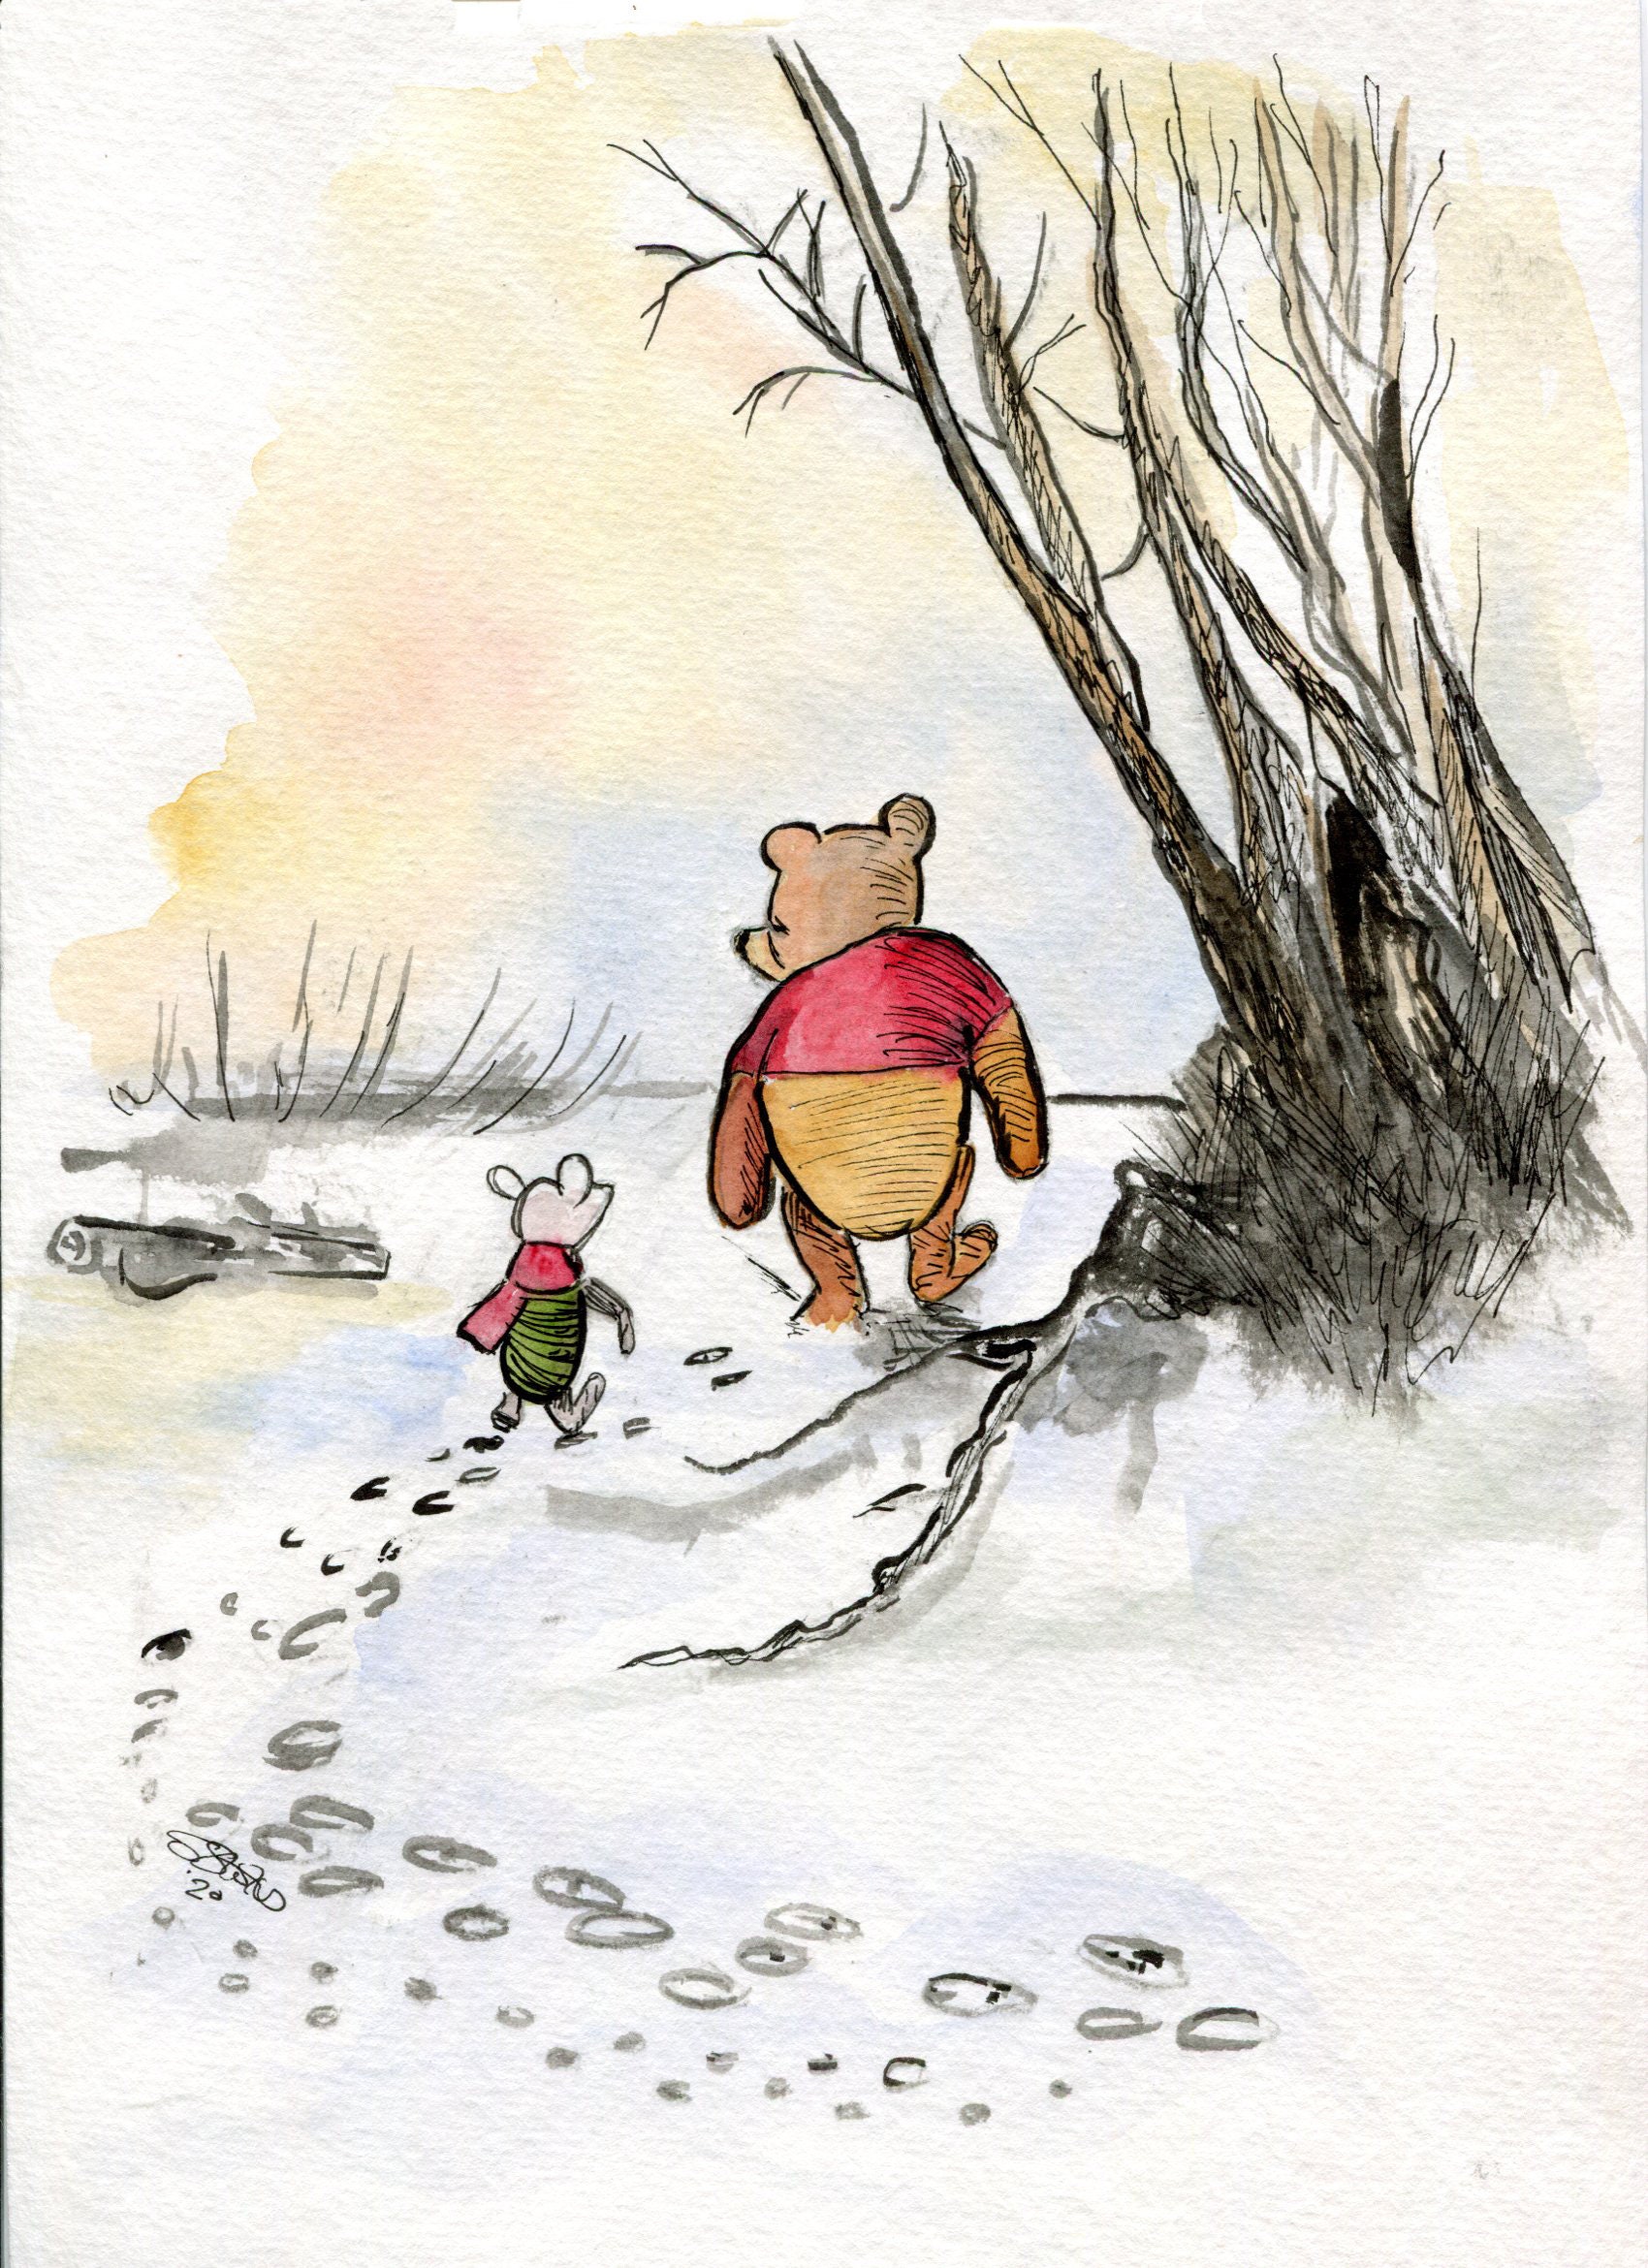 Winnie the Pooh and Piglet go for a walk - Winnie The Pooh - Sticker